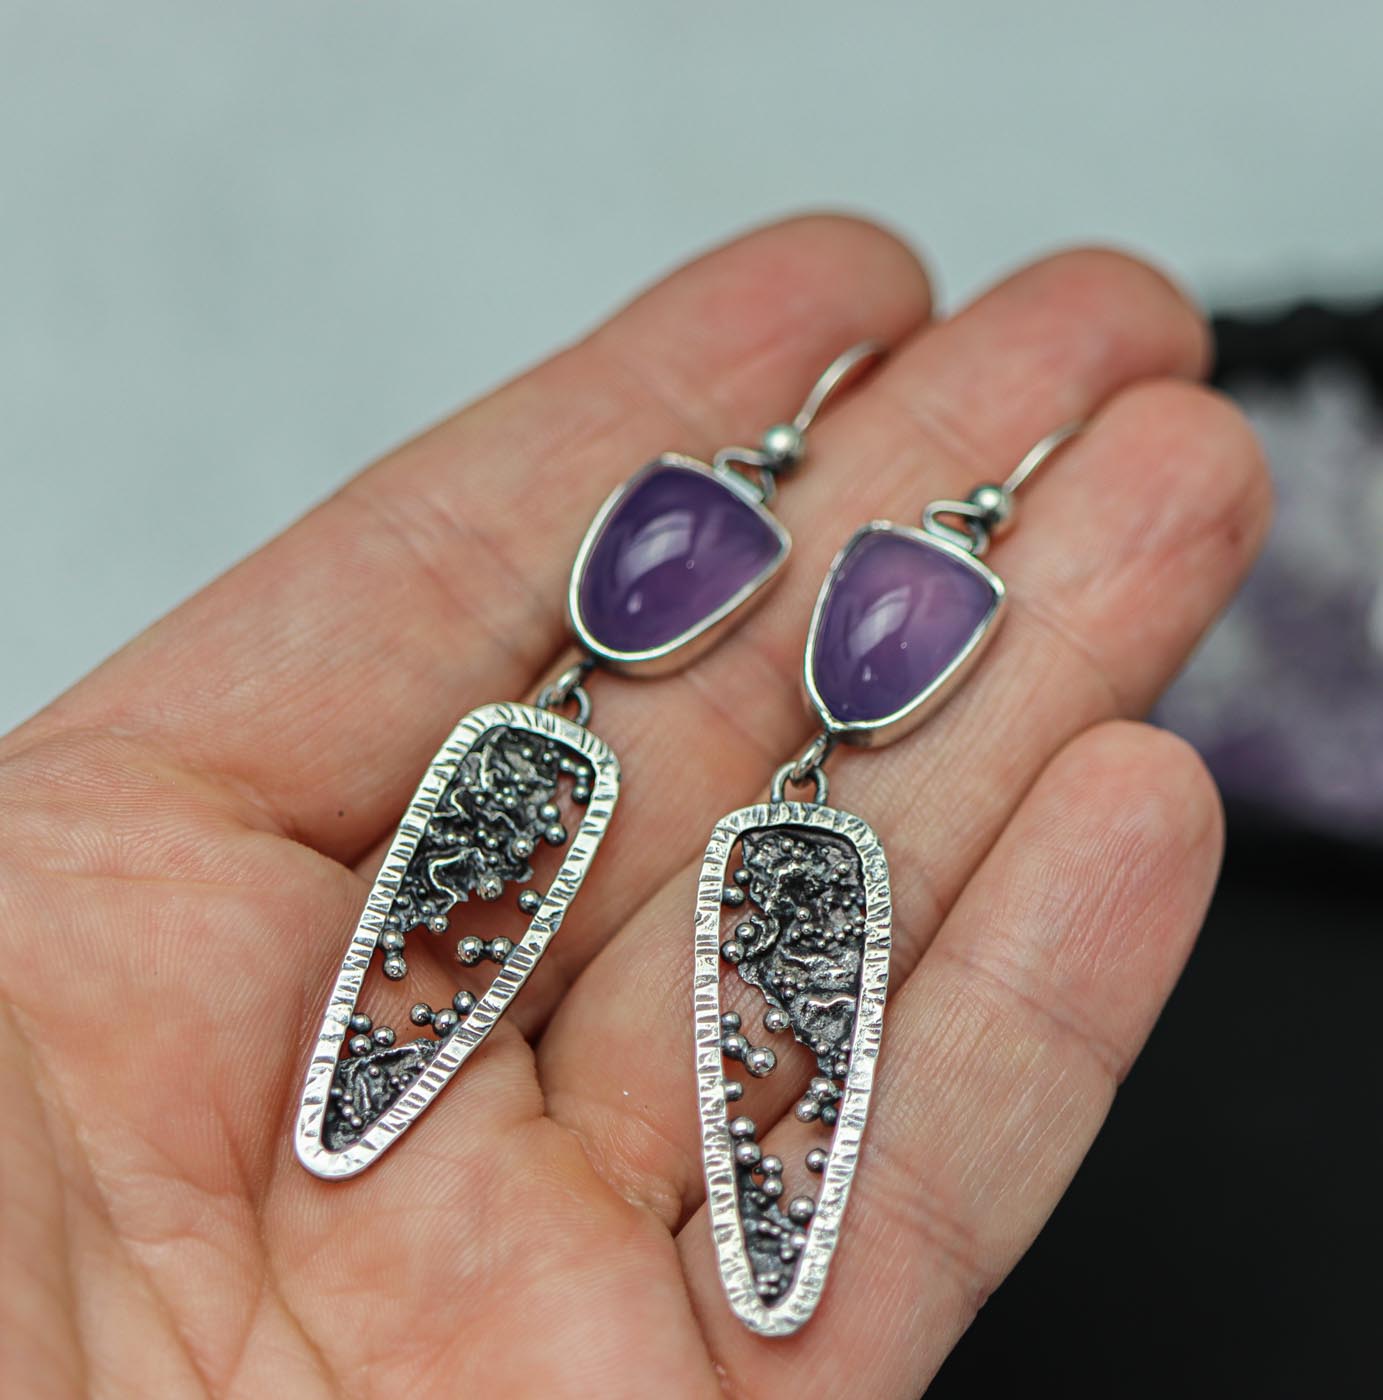 Lavender Chalcedony Reticulation and Granulation Earrings